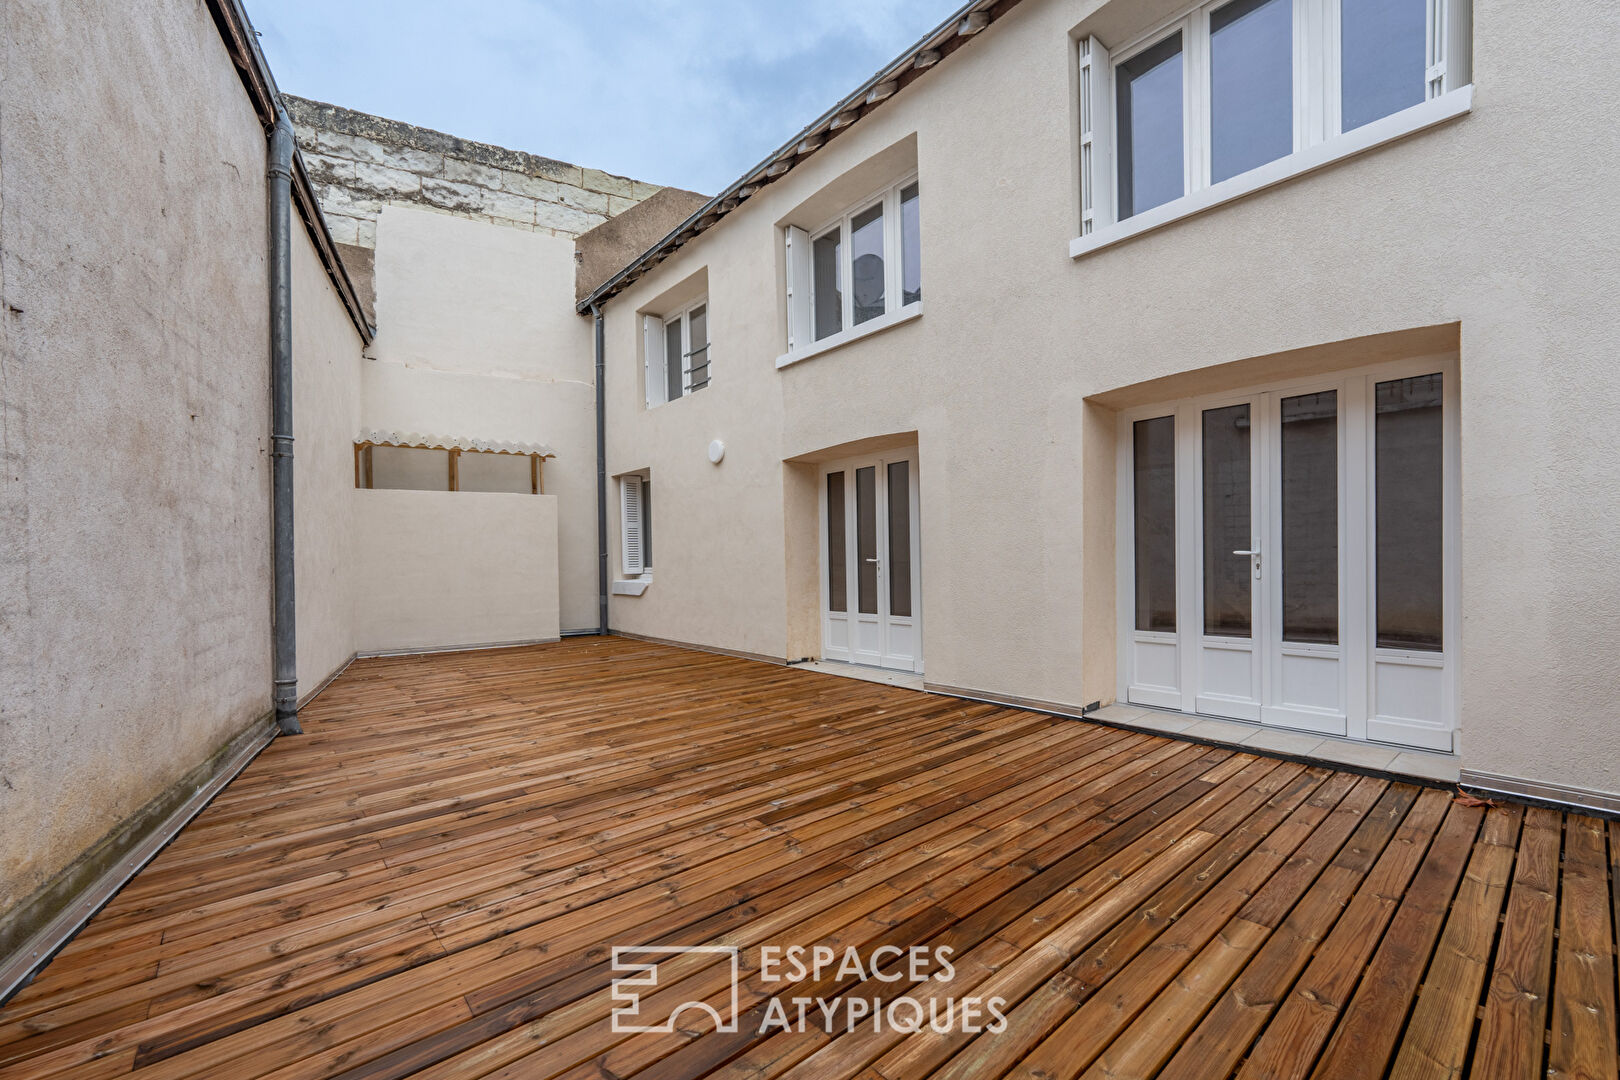 Renovated duplex with terrace in the heart of town